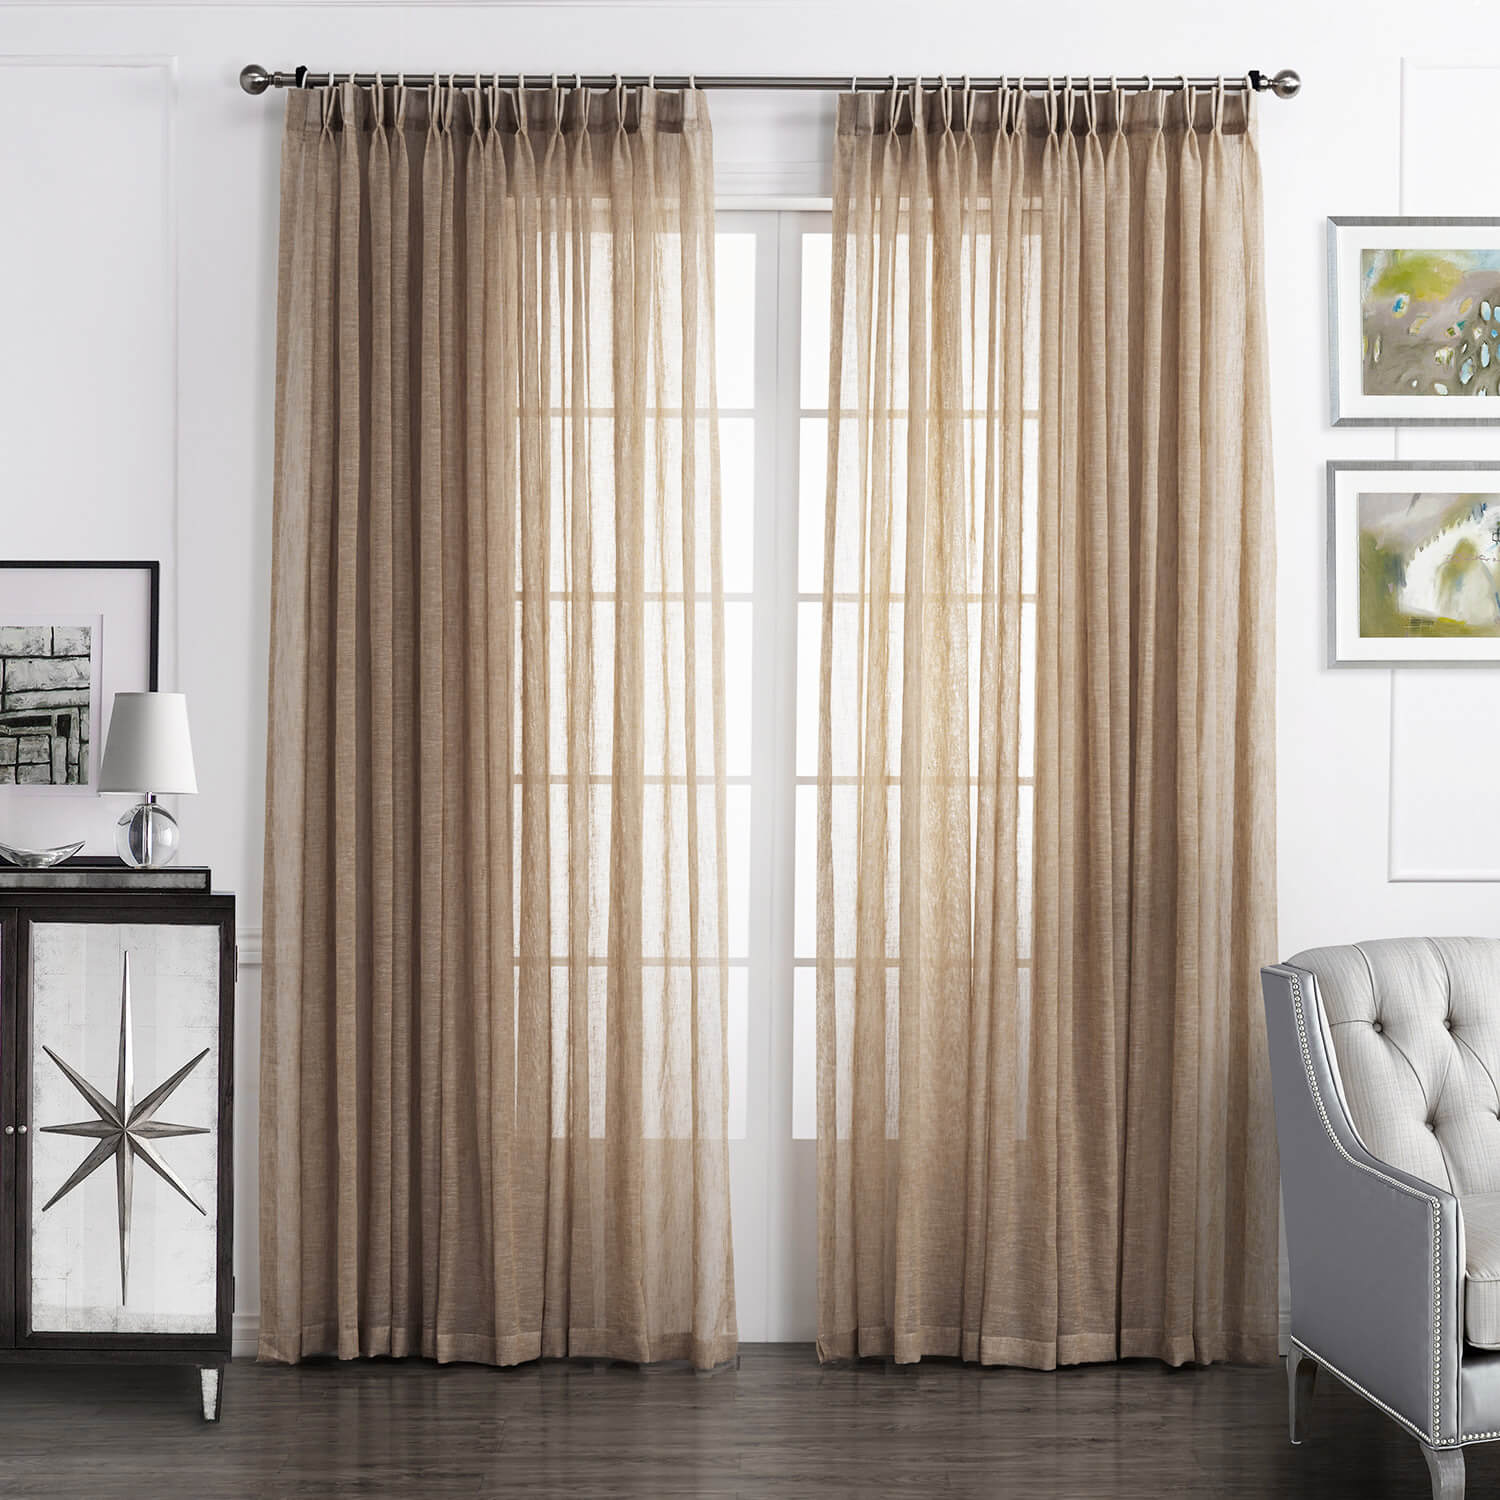 Tan Beige Linen Sheer Curtains for Living Room 2 Panels – Anady Top